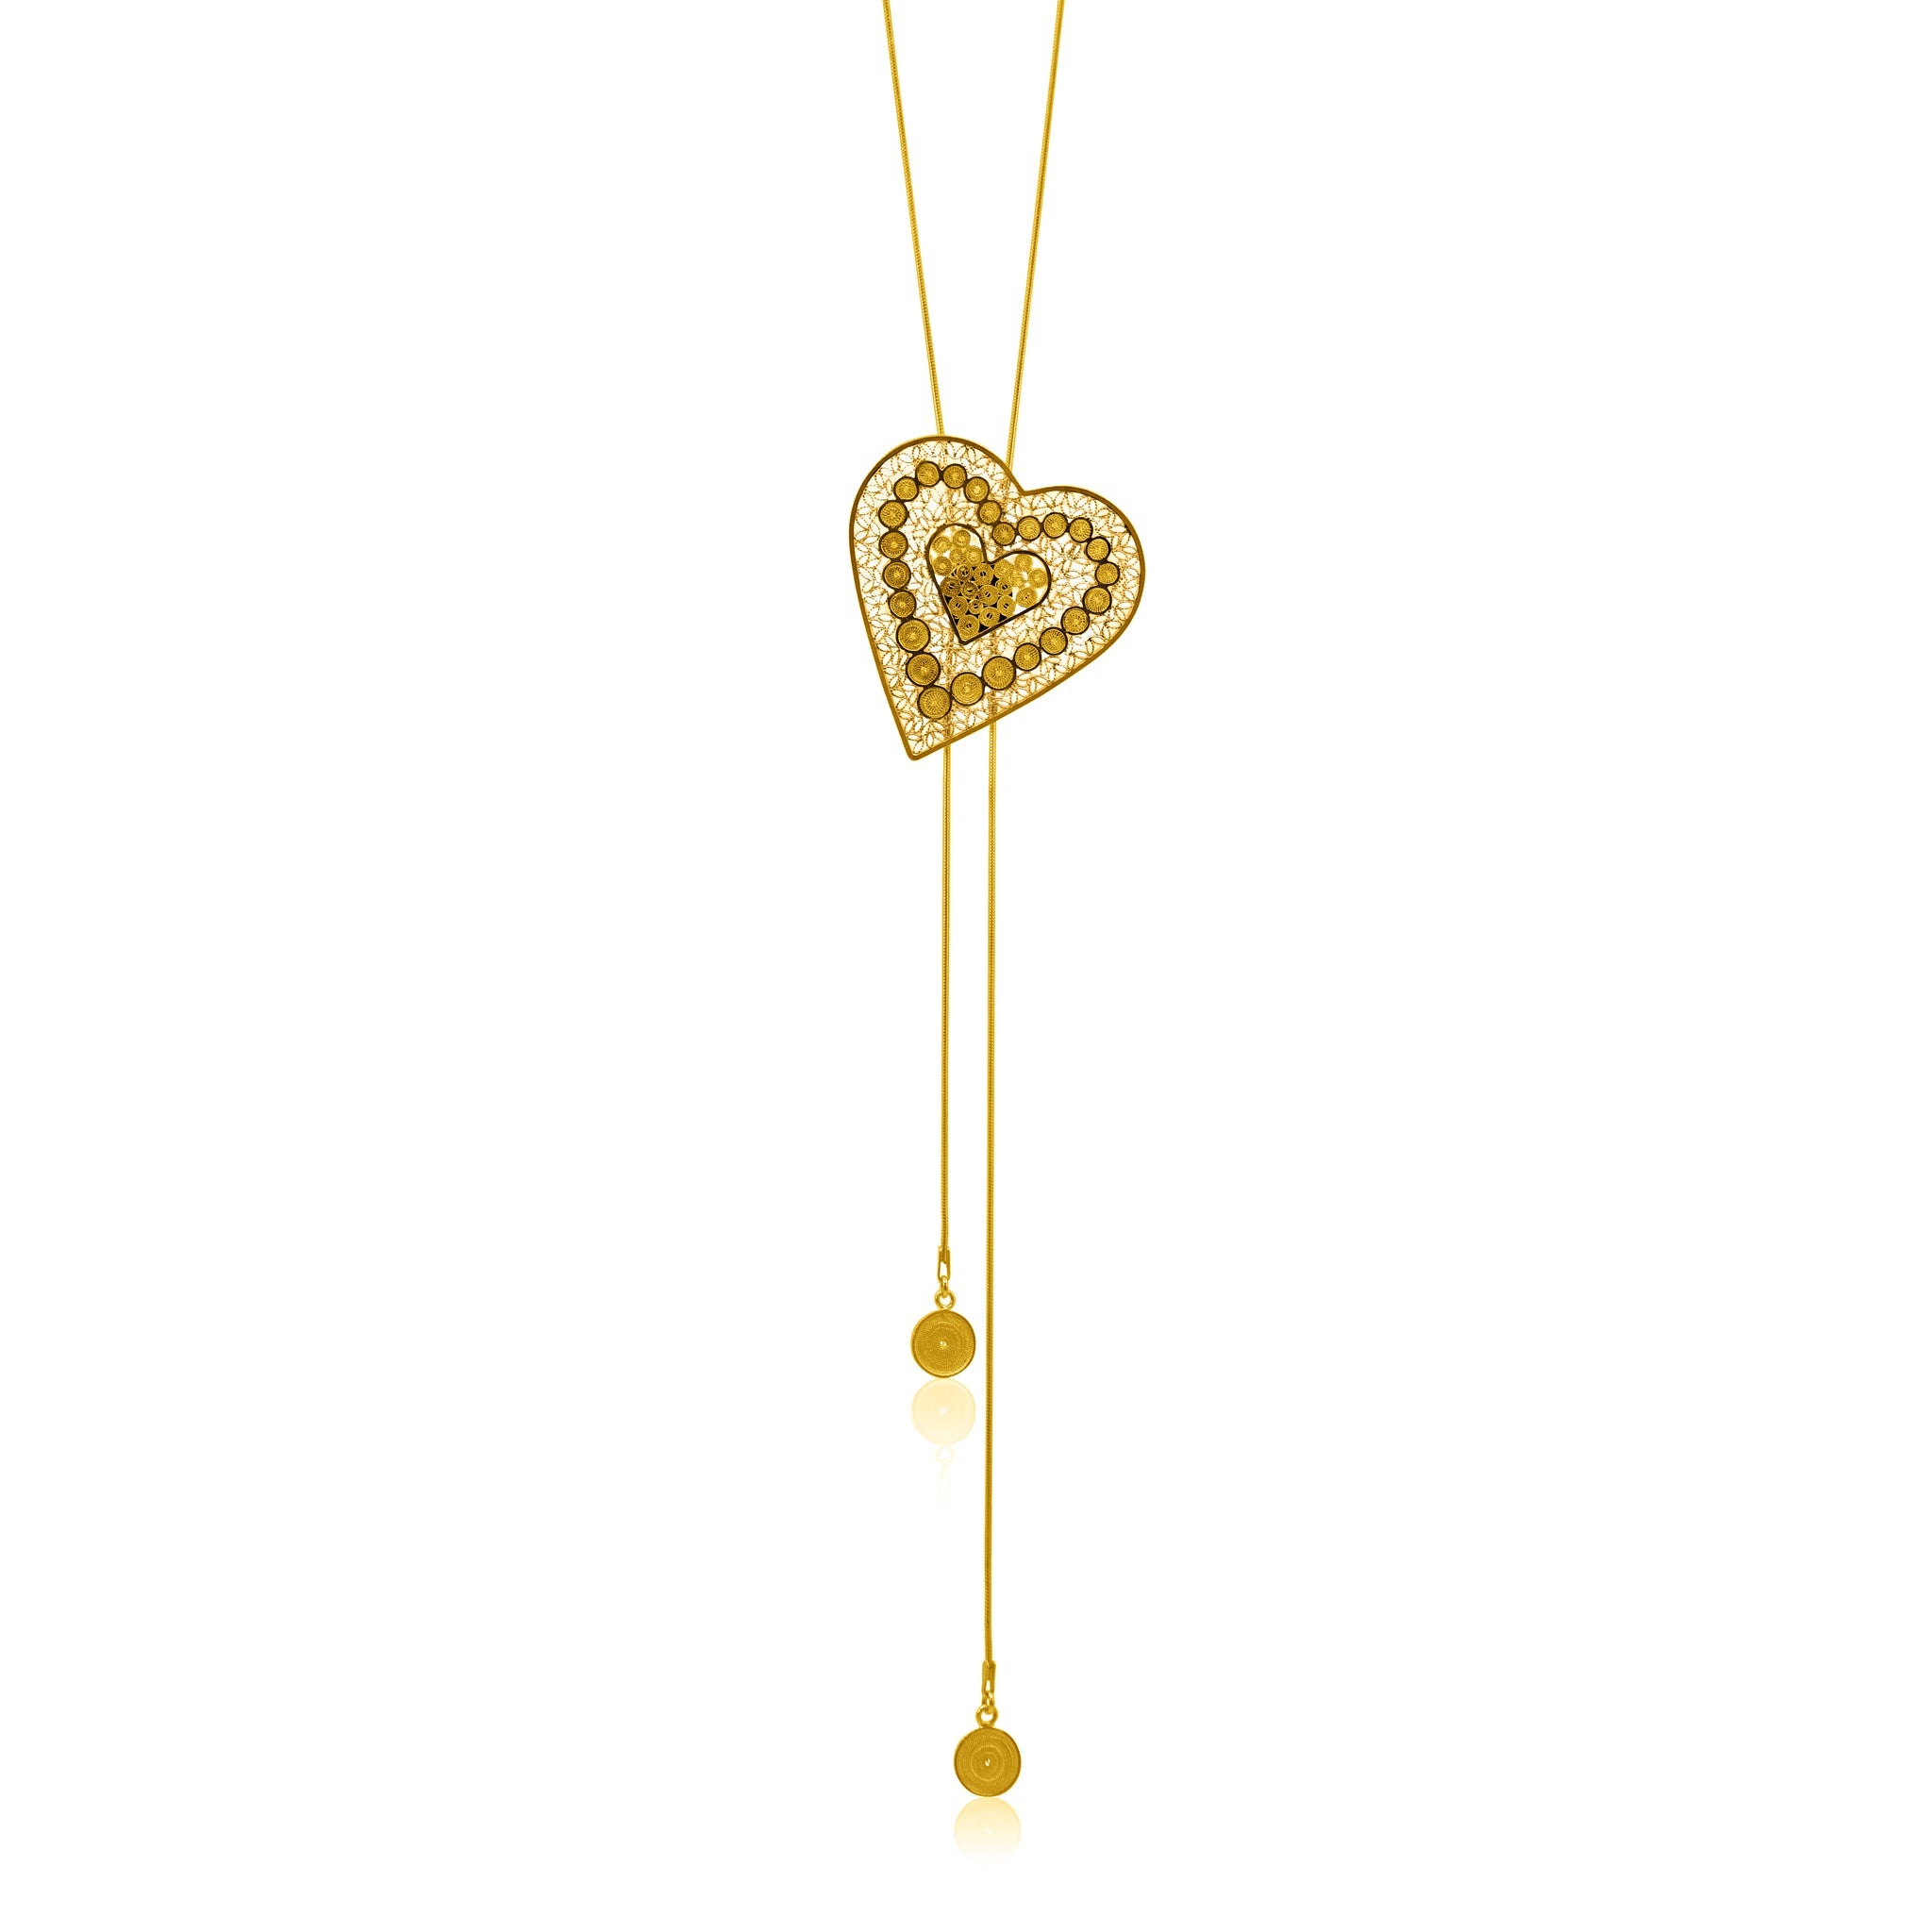 HEART GOLD LOVE LONG NECKLACE FILIGREE